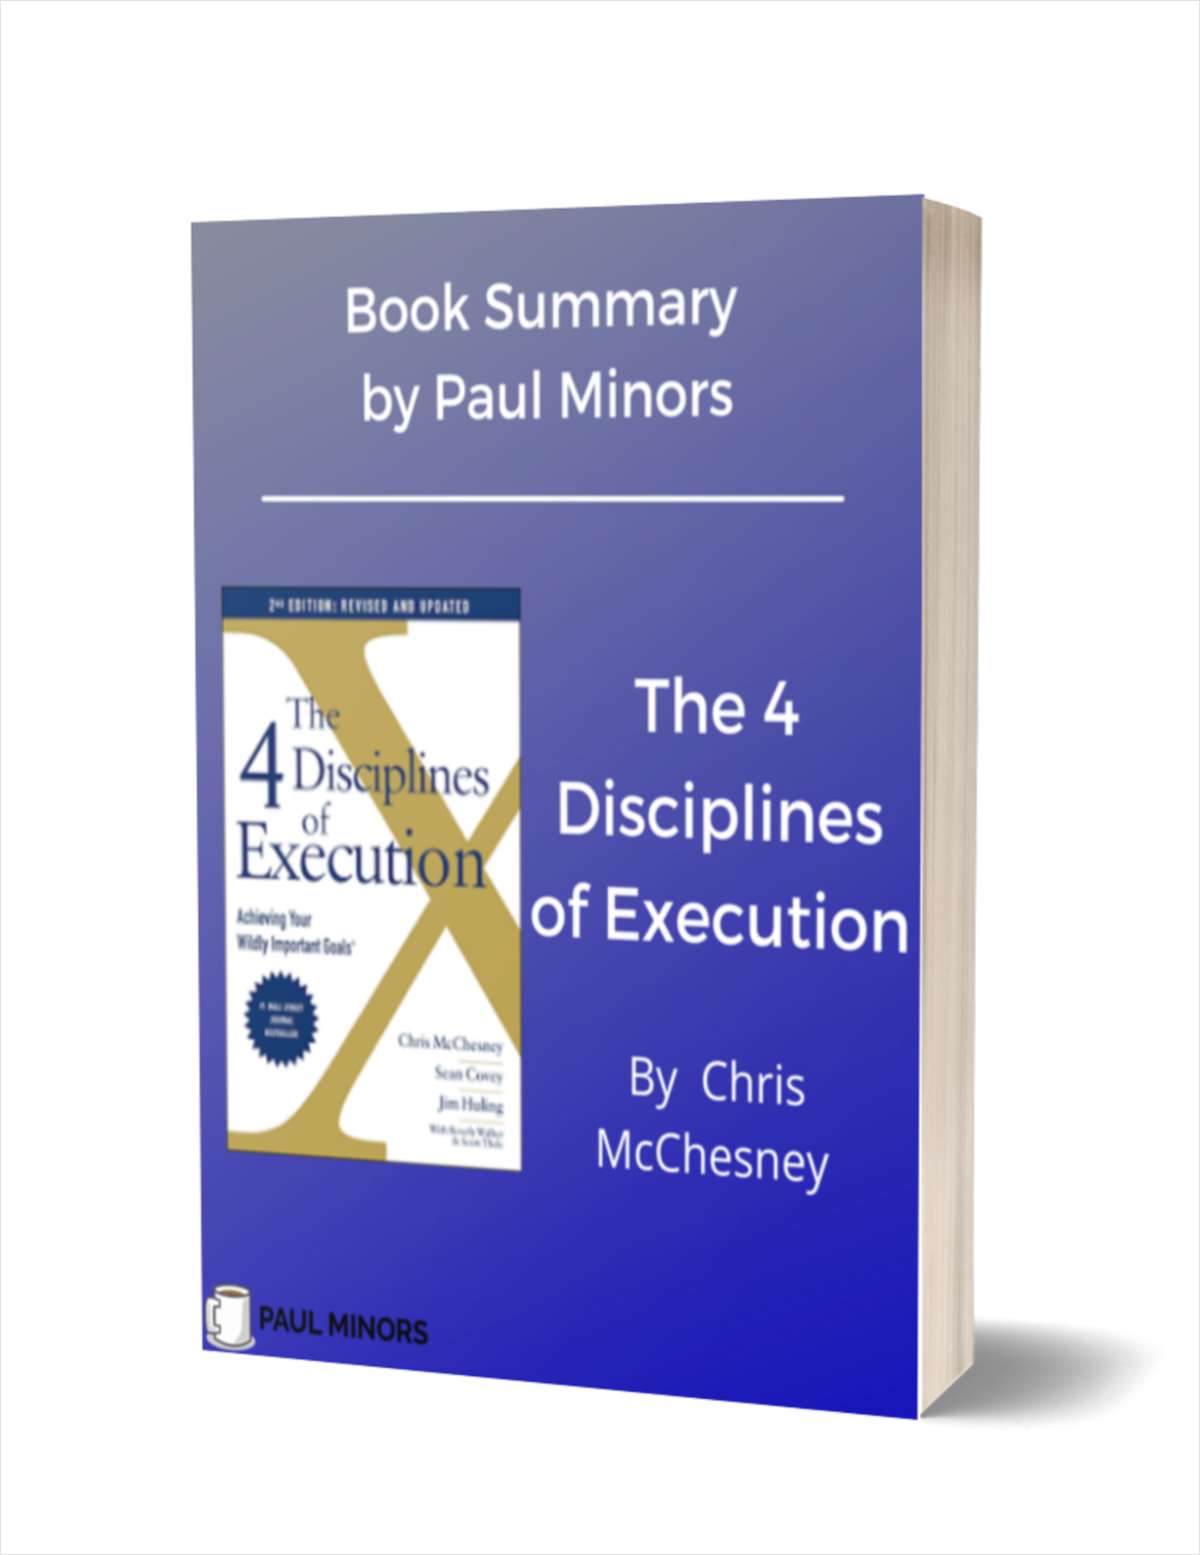 The 4 Disciplines of Execution Book Summary